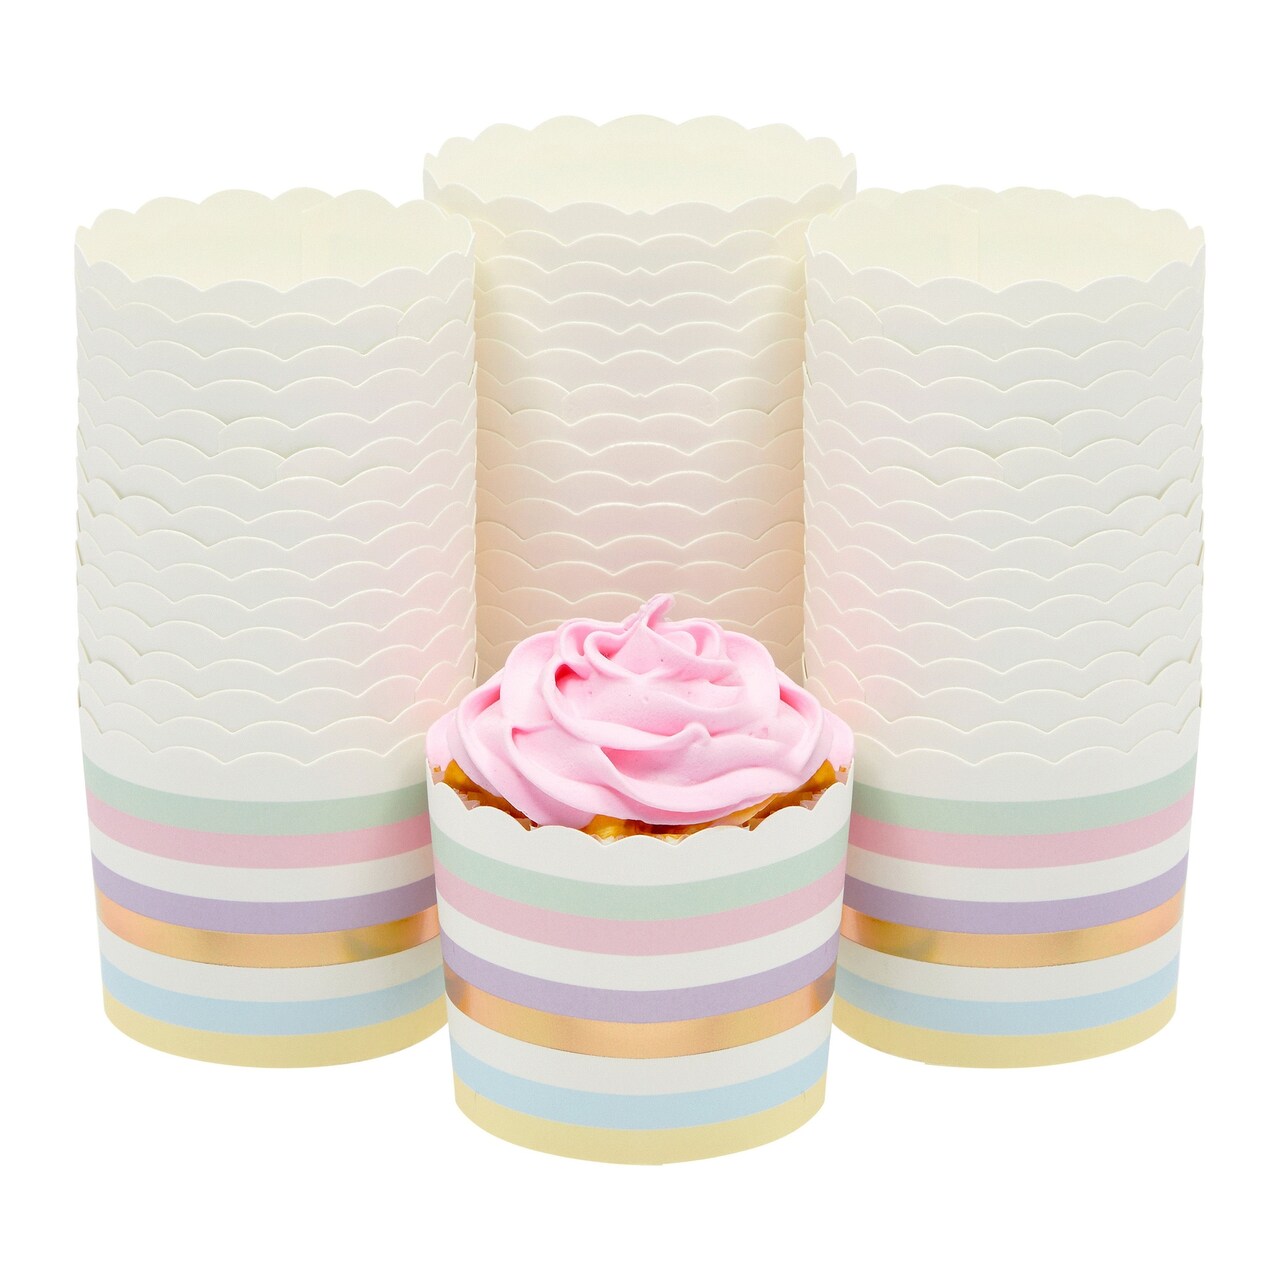 50-Pack Pastel Cupcake Liners - Large Paper Baking Cups for Birthdays, Home  Baking, Bake Sales, Bridal Showers (2.2 In)